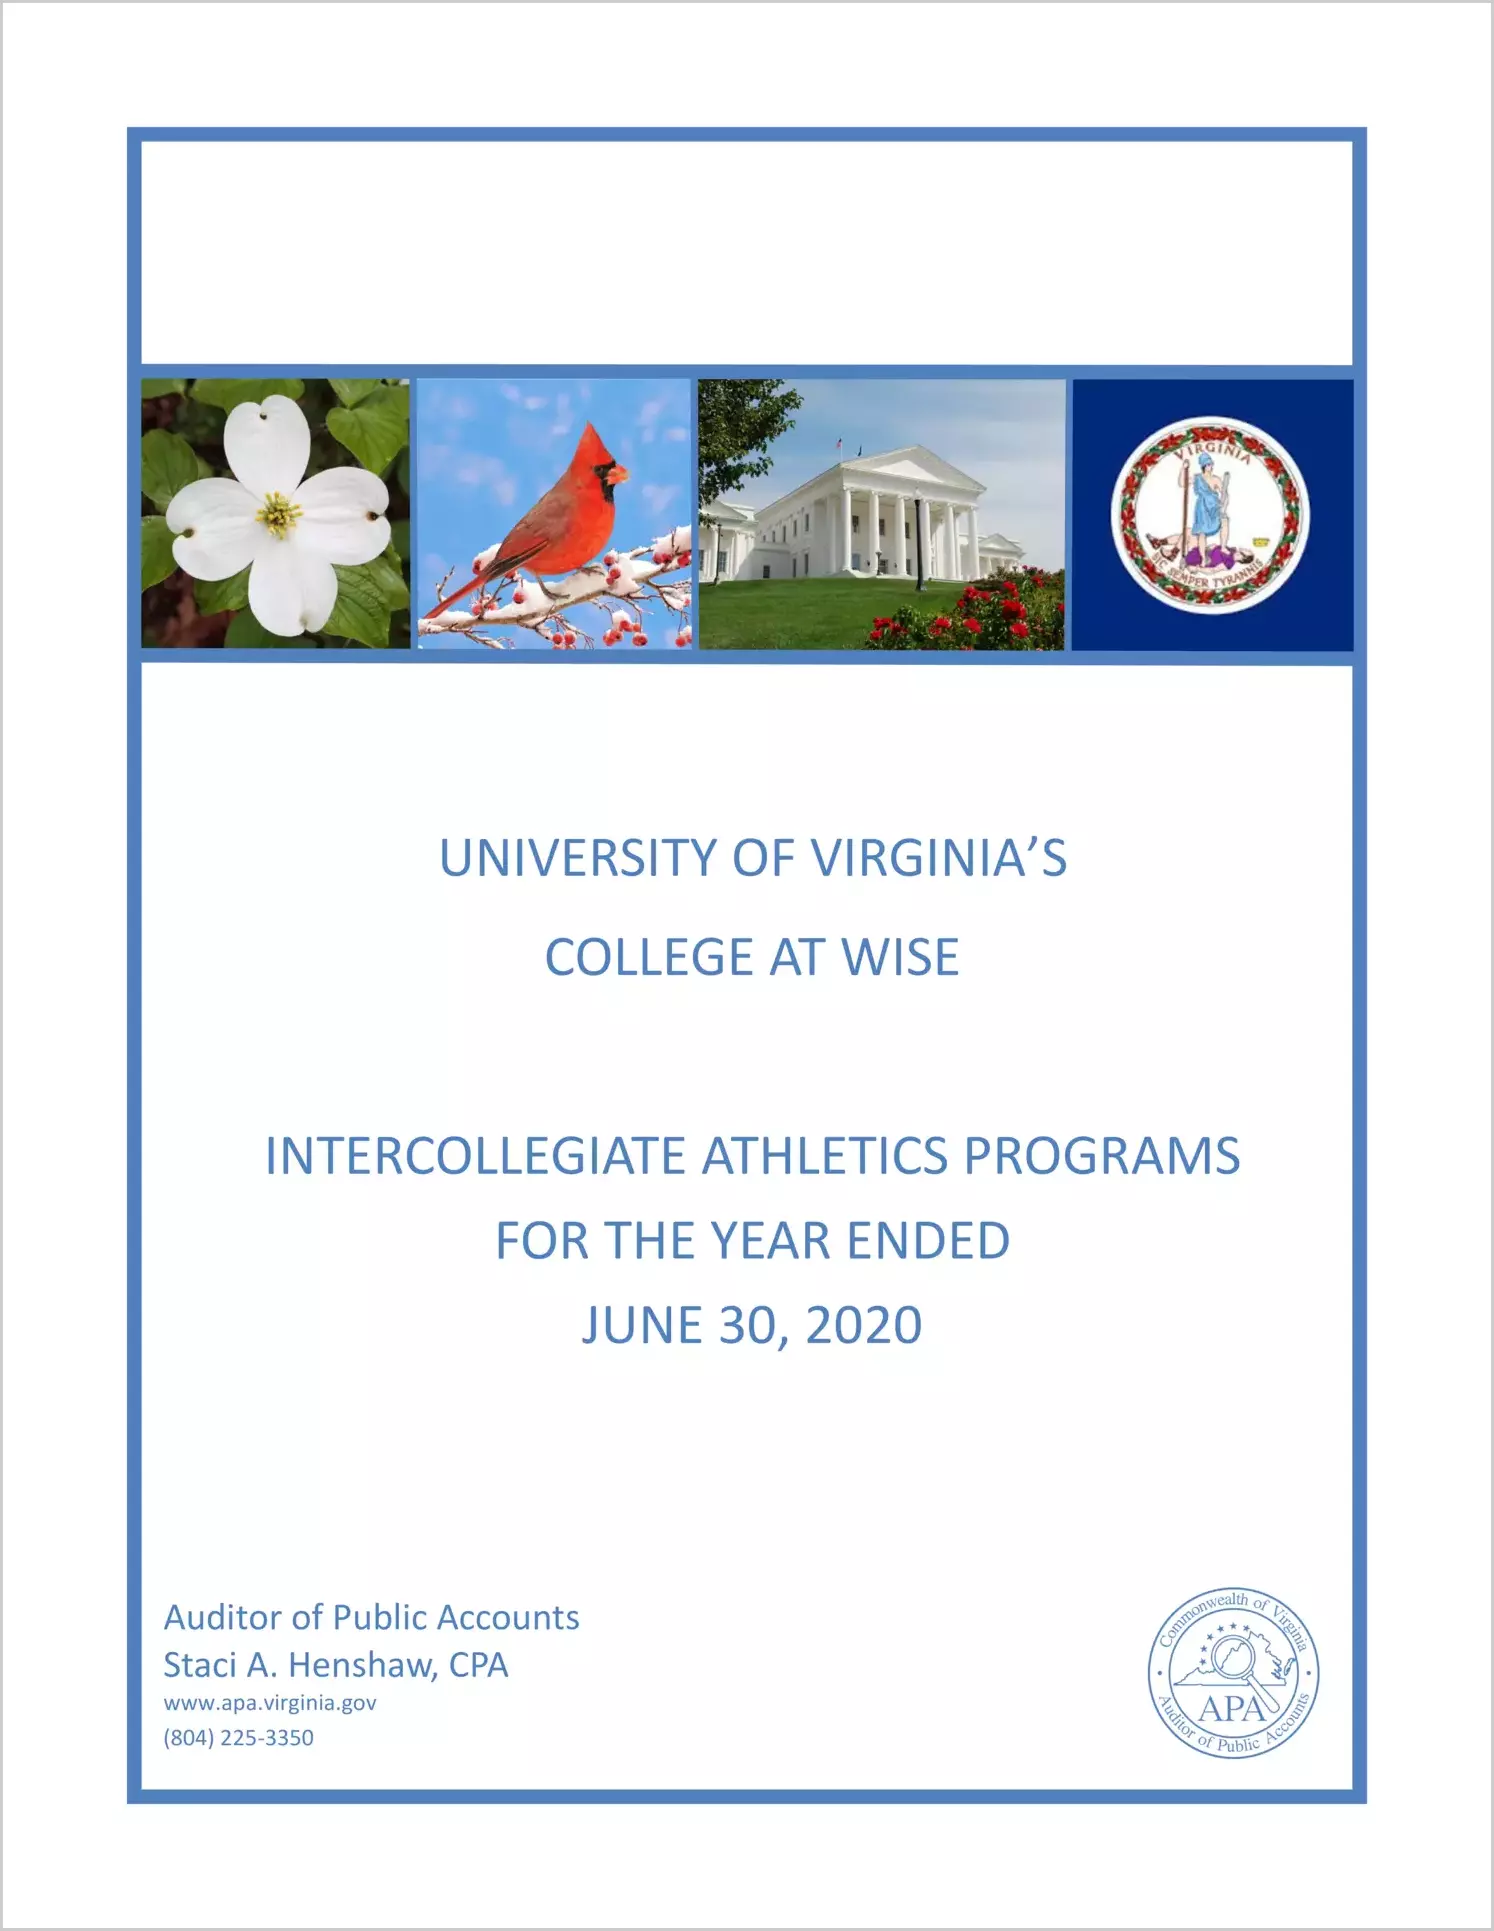 University of Virginia's College at Wise Intercollegiate Athletics Programs for the year ended June 30, 2020